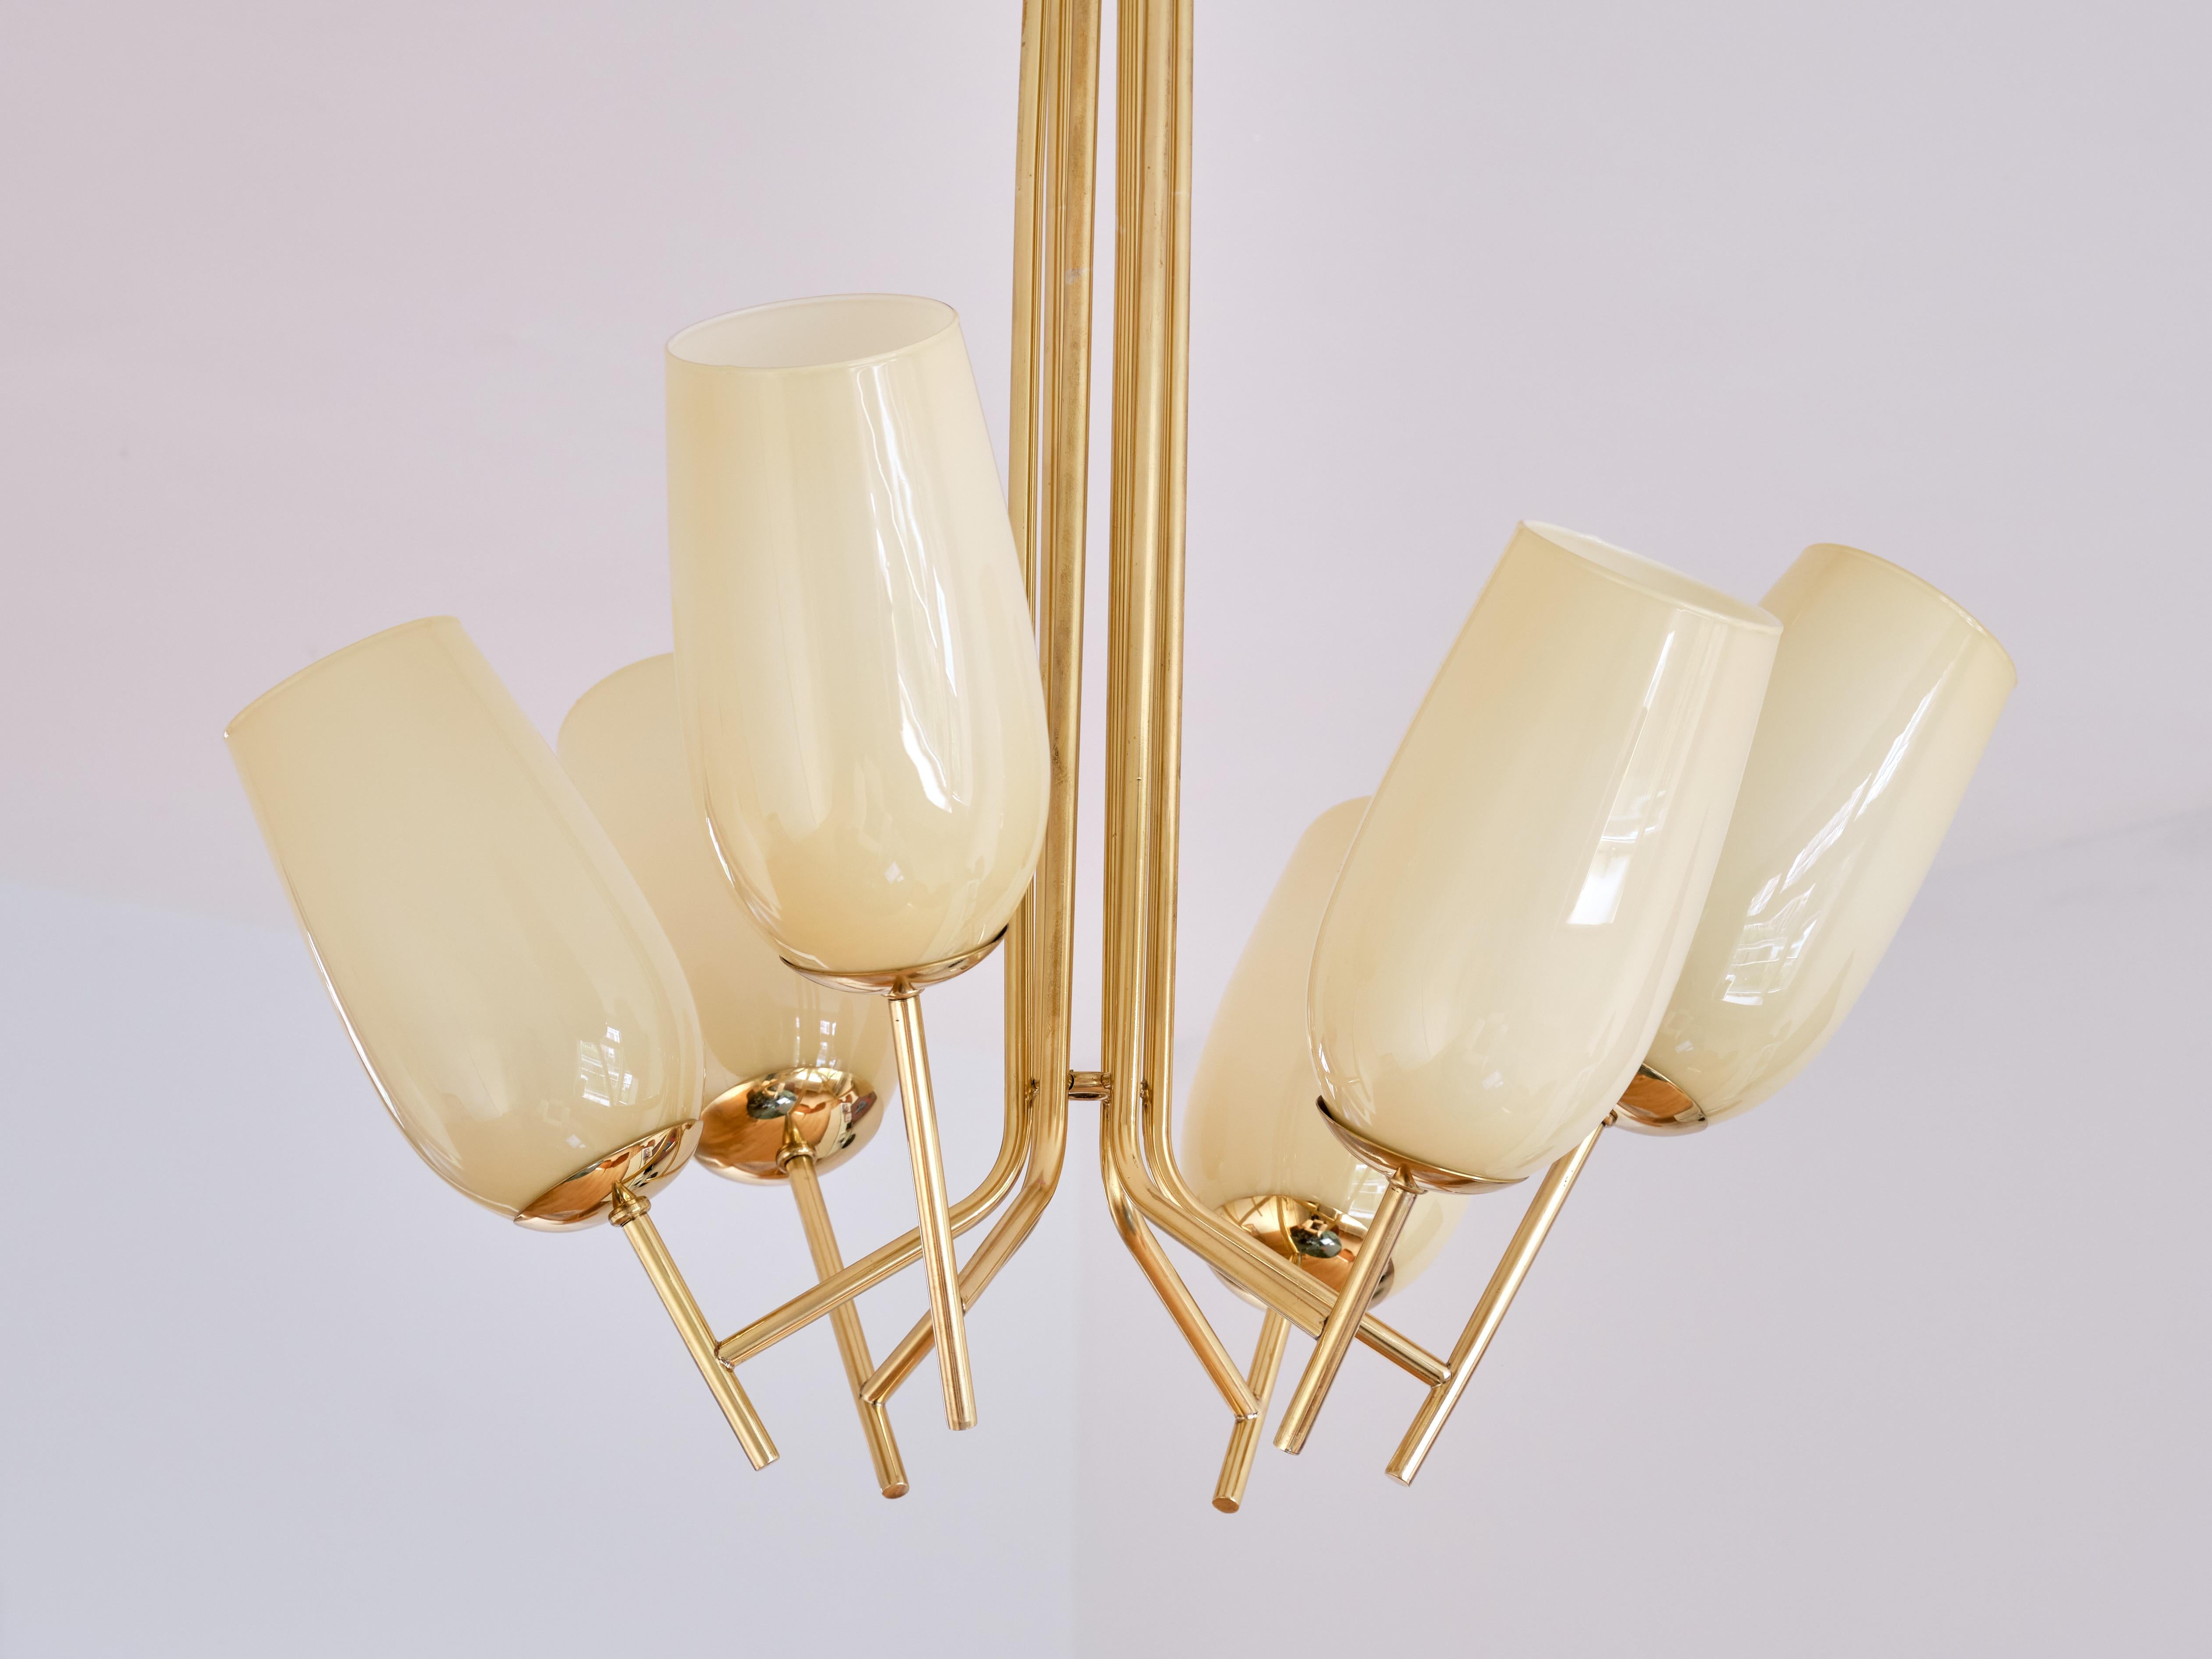 Paavo Tynell Six Arm Chandelier in Brass and Amber Glass, Taito, Finland, 1940s 3